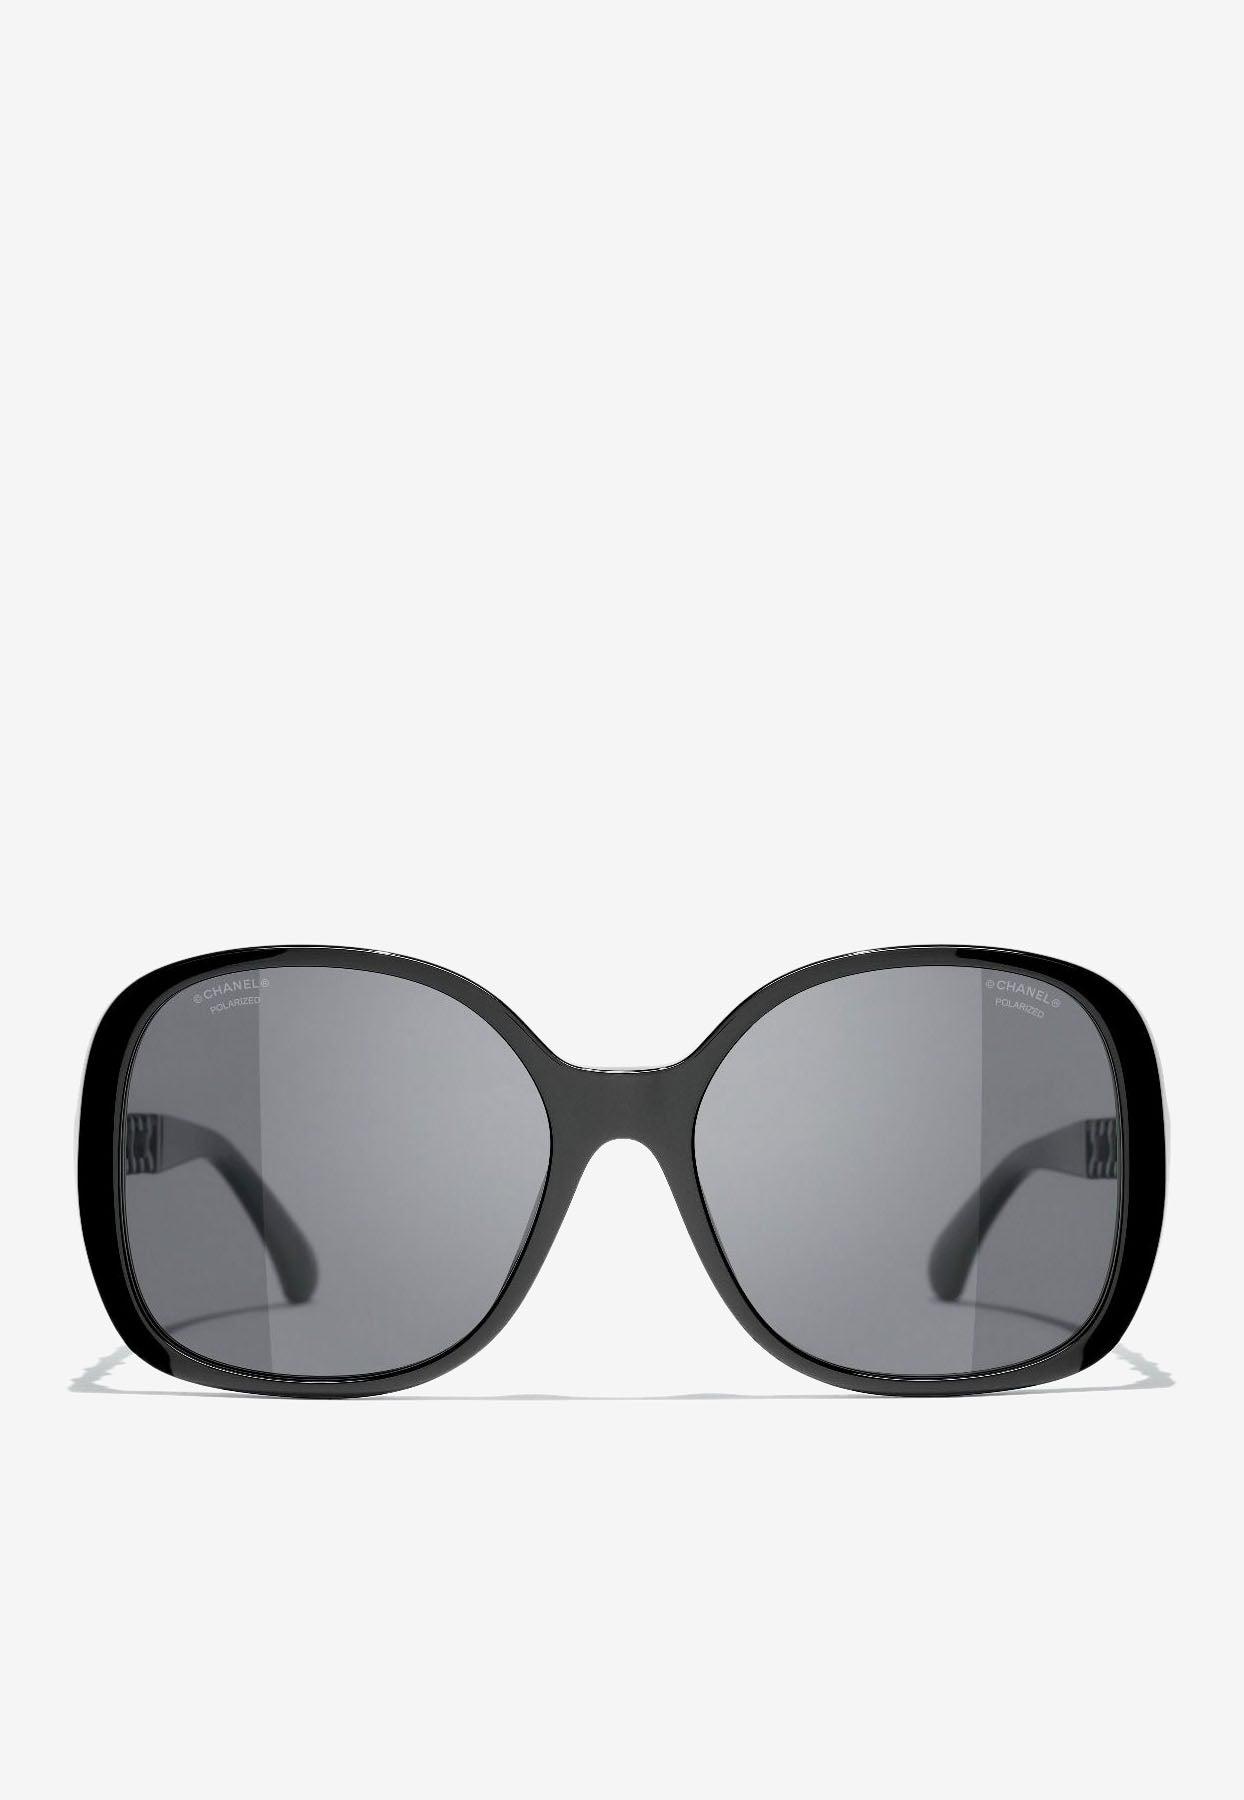 Chanel Rectangular Sunglasses With Chain Detail in Grey